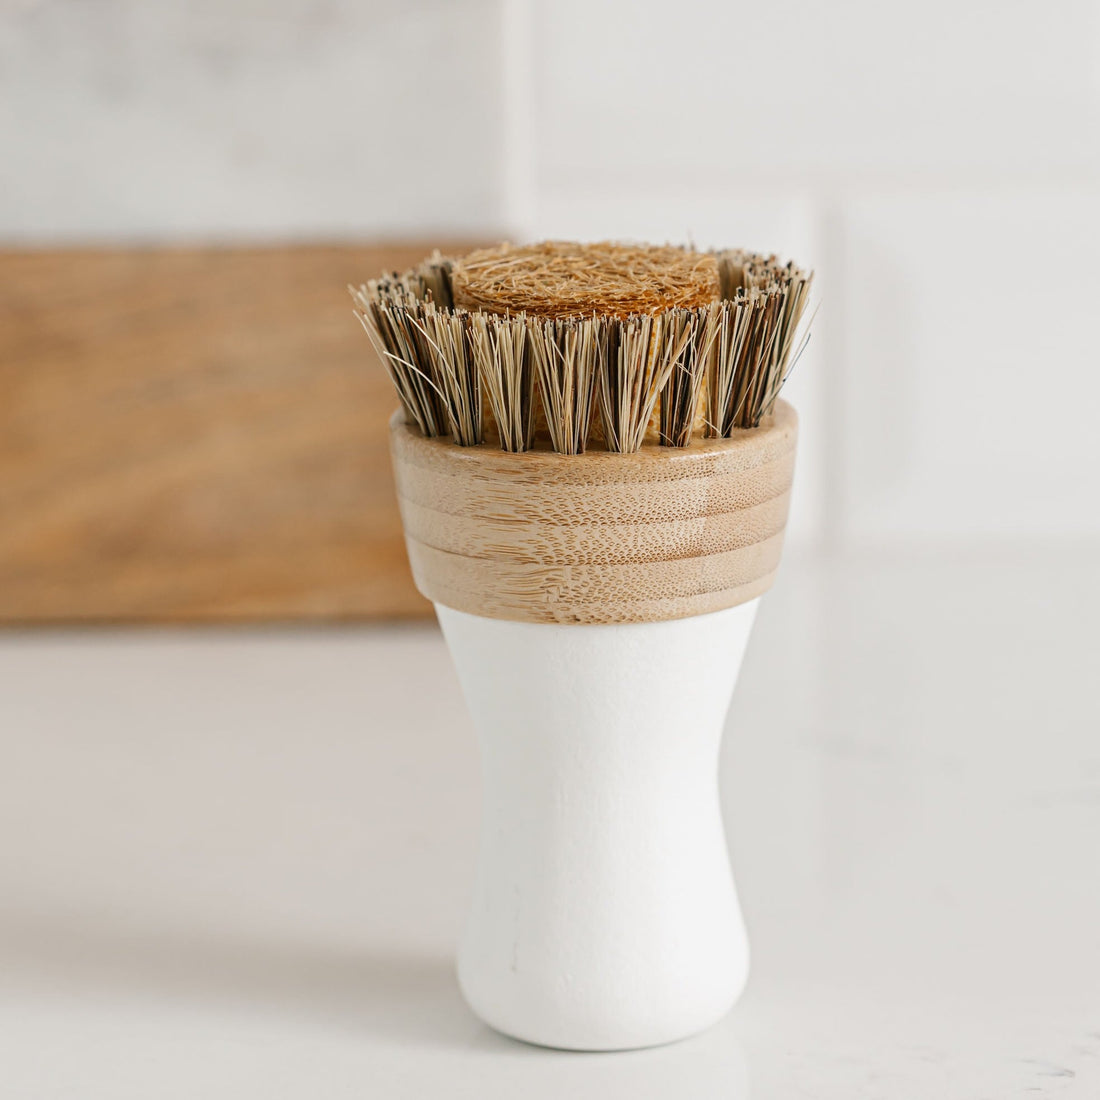 Bamboo dish brush that has a replaceable head. Has a hybrid brush head with a sponge and bristles from natural fibers